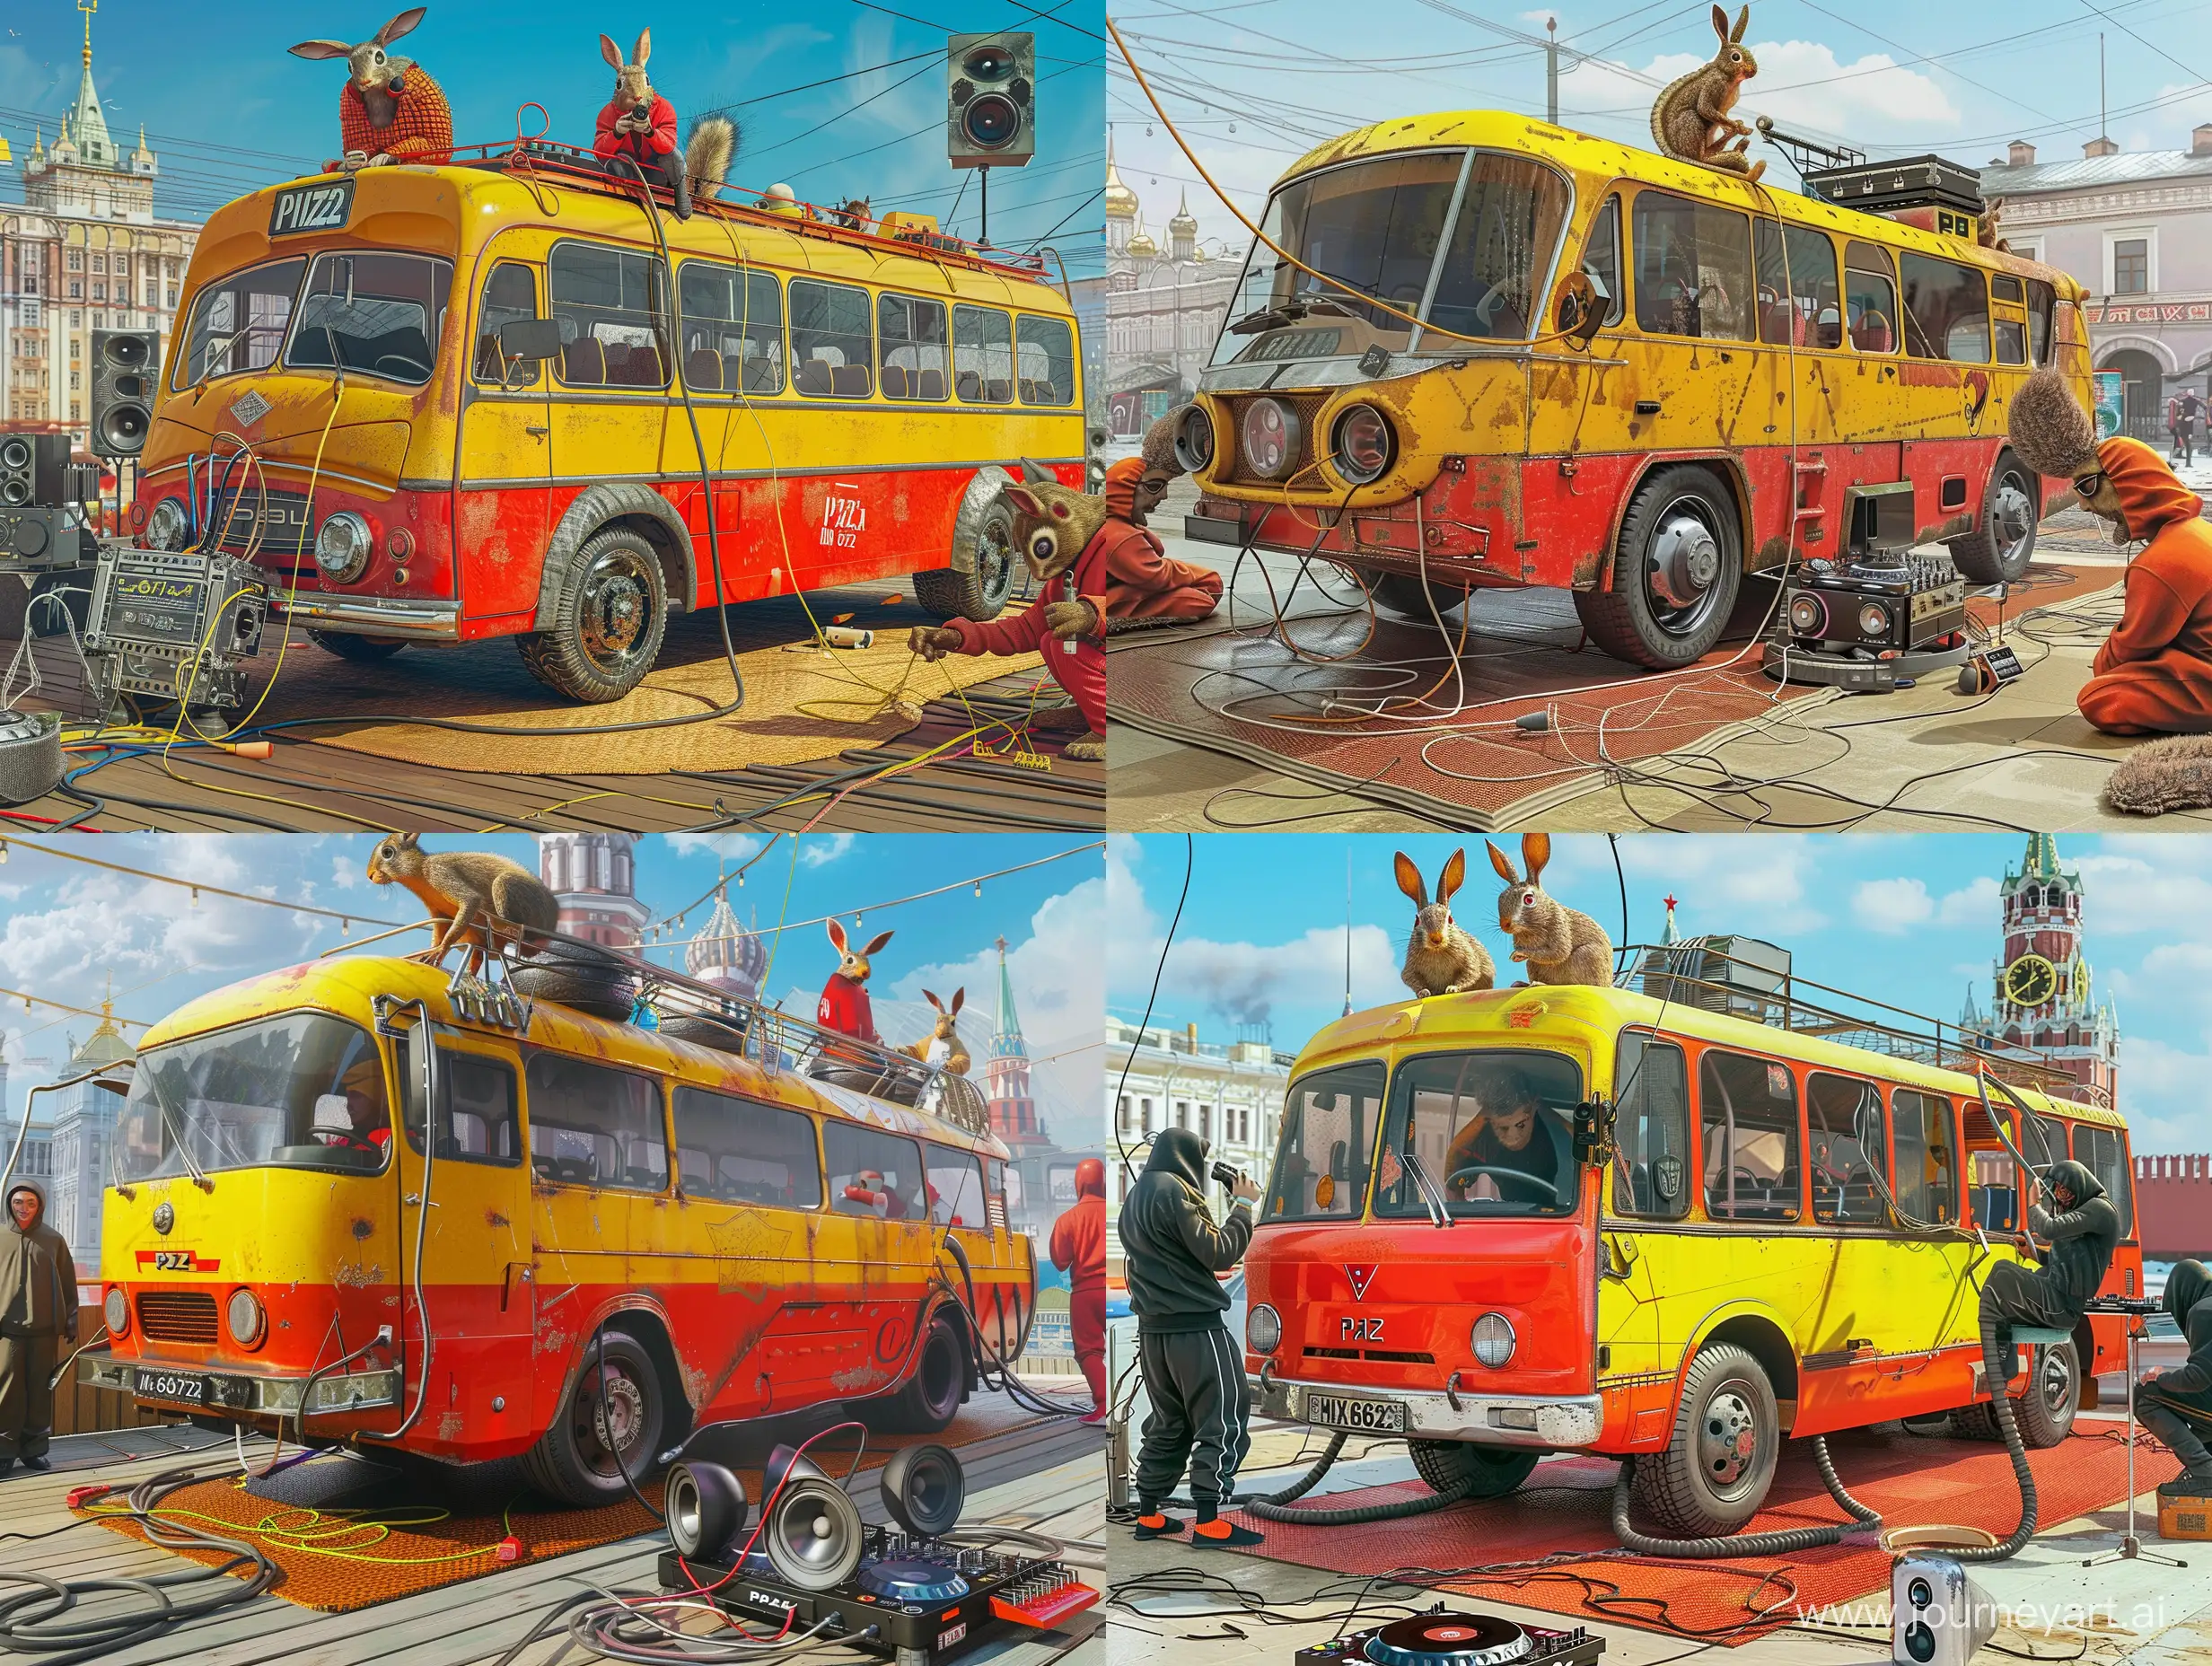 Bus Soviet PAZ 672 In tuning, commercial photo retouching, photorealism, good Rendering, red yellow, metal, futuristic tuning body kit, wheels on 30-inch alloy wheels, in the center of Moscow, visible in the background in Moscow City, the bus stands on a mat of Uzbek origin, next to the bus there are people with the heads of Hares they are wearing tracksuits and eating carrots, wires are coming off the bus and connected to audio speakers that stand next to the bus, on the roof of the bus there is a DJ in the form of a mad squirrel who plays on a DJ player, commercial illustration with gorgeous photo realism that are used in glossy magazines, irony, humor, arrogance, intense, a little oriental style